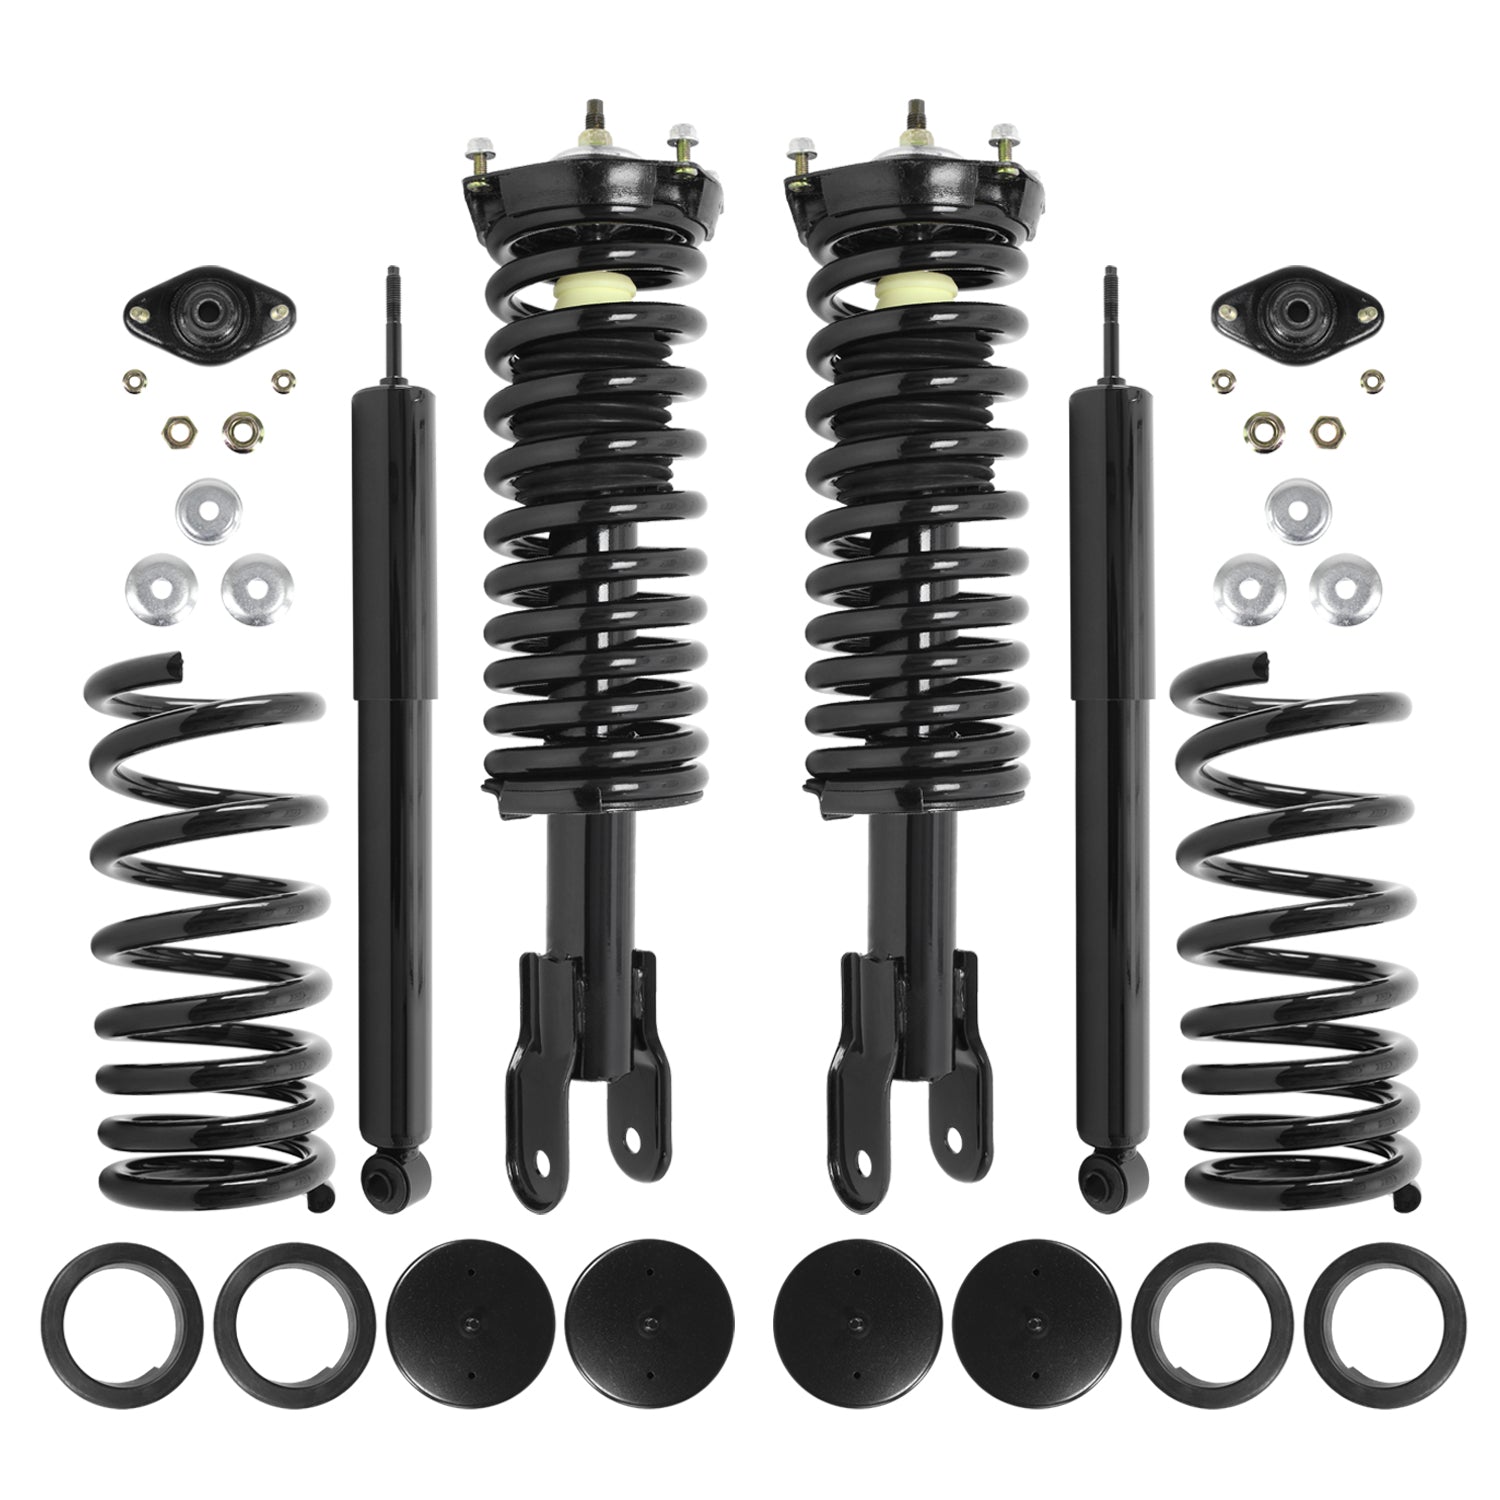 Unity 68110C Front and Rear Air Spring to Coil Spring Conversion Kit for 1993-1998 Lincoln Mark VIII RWD V8 4.6L